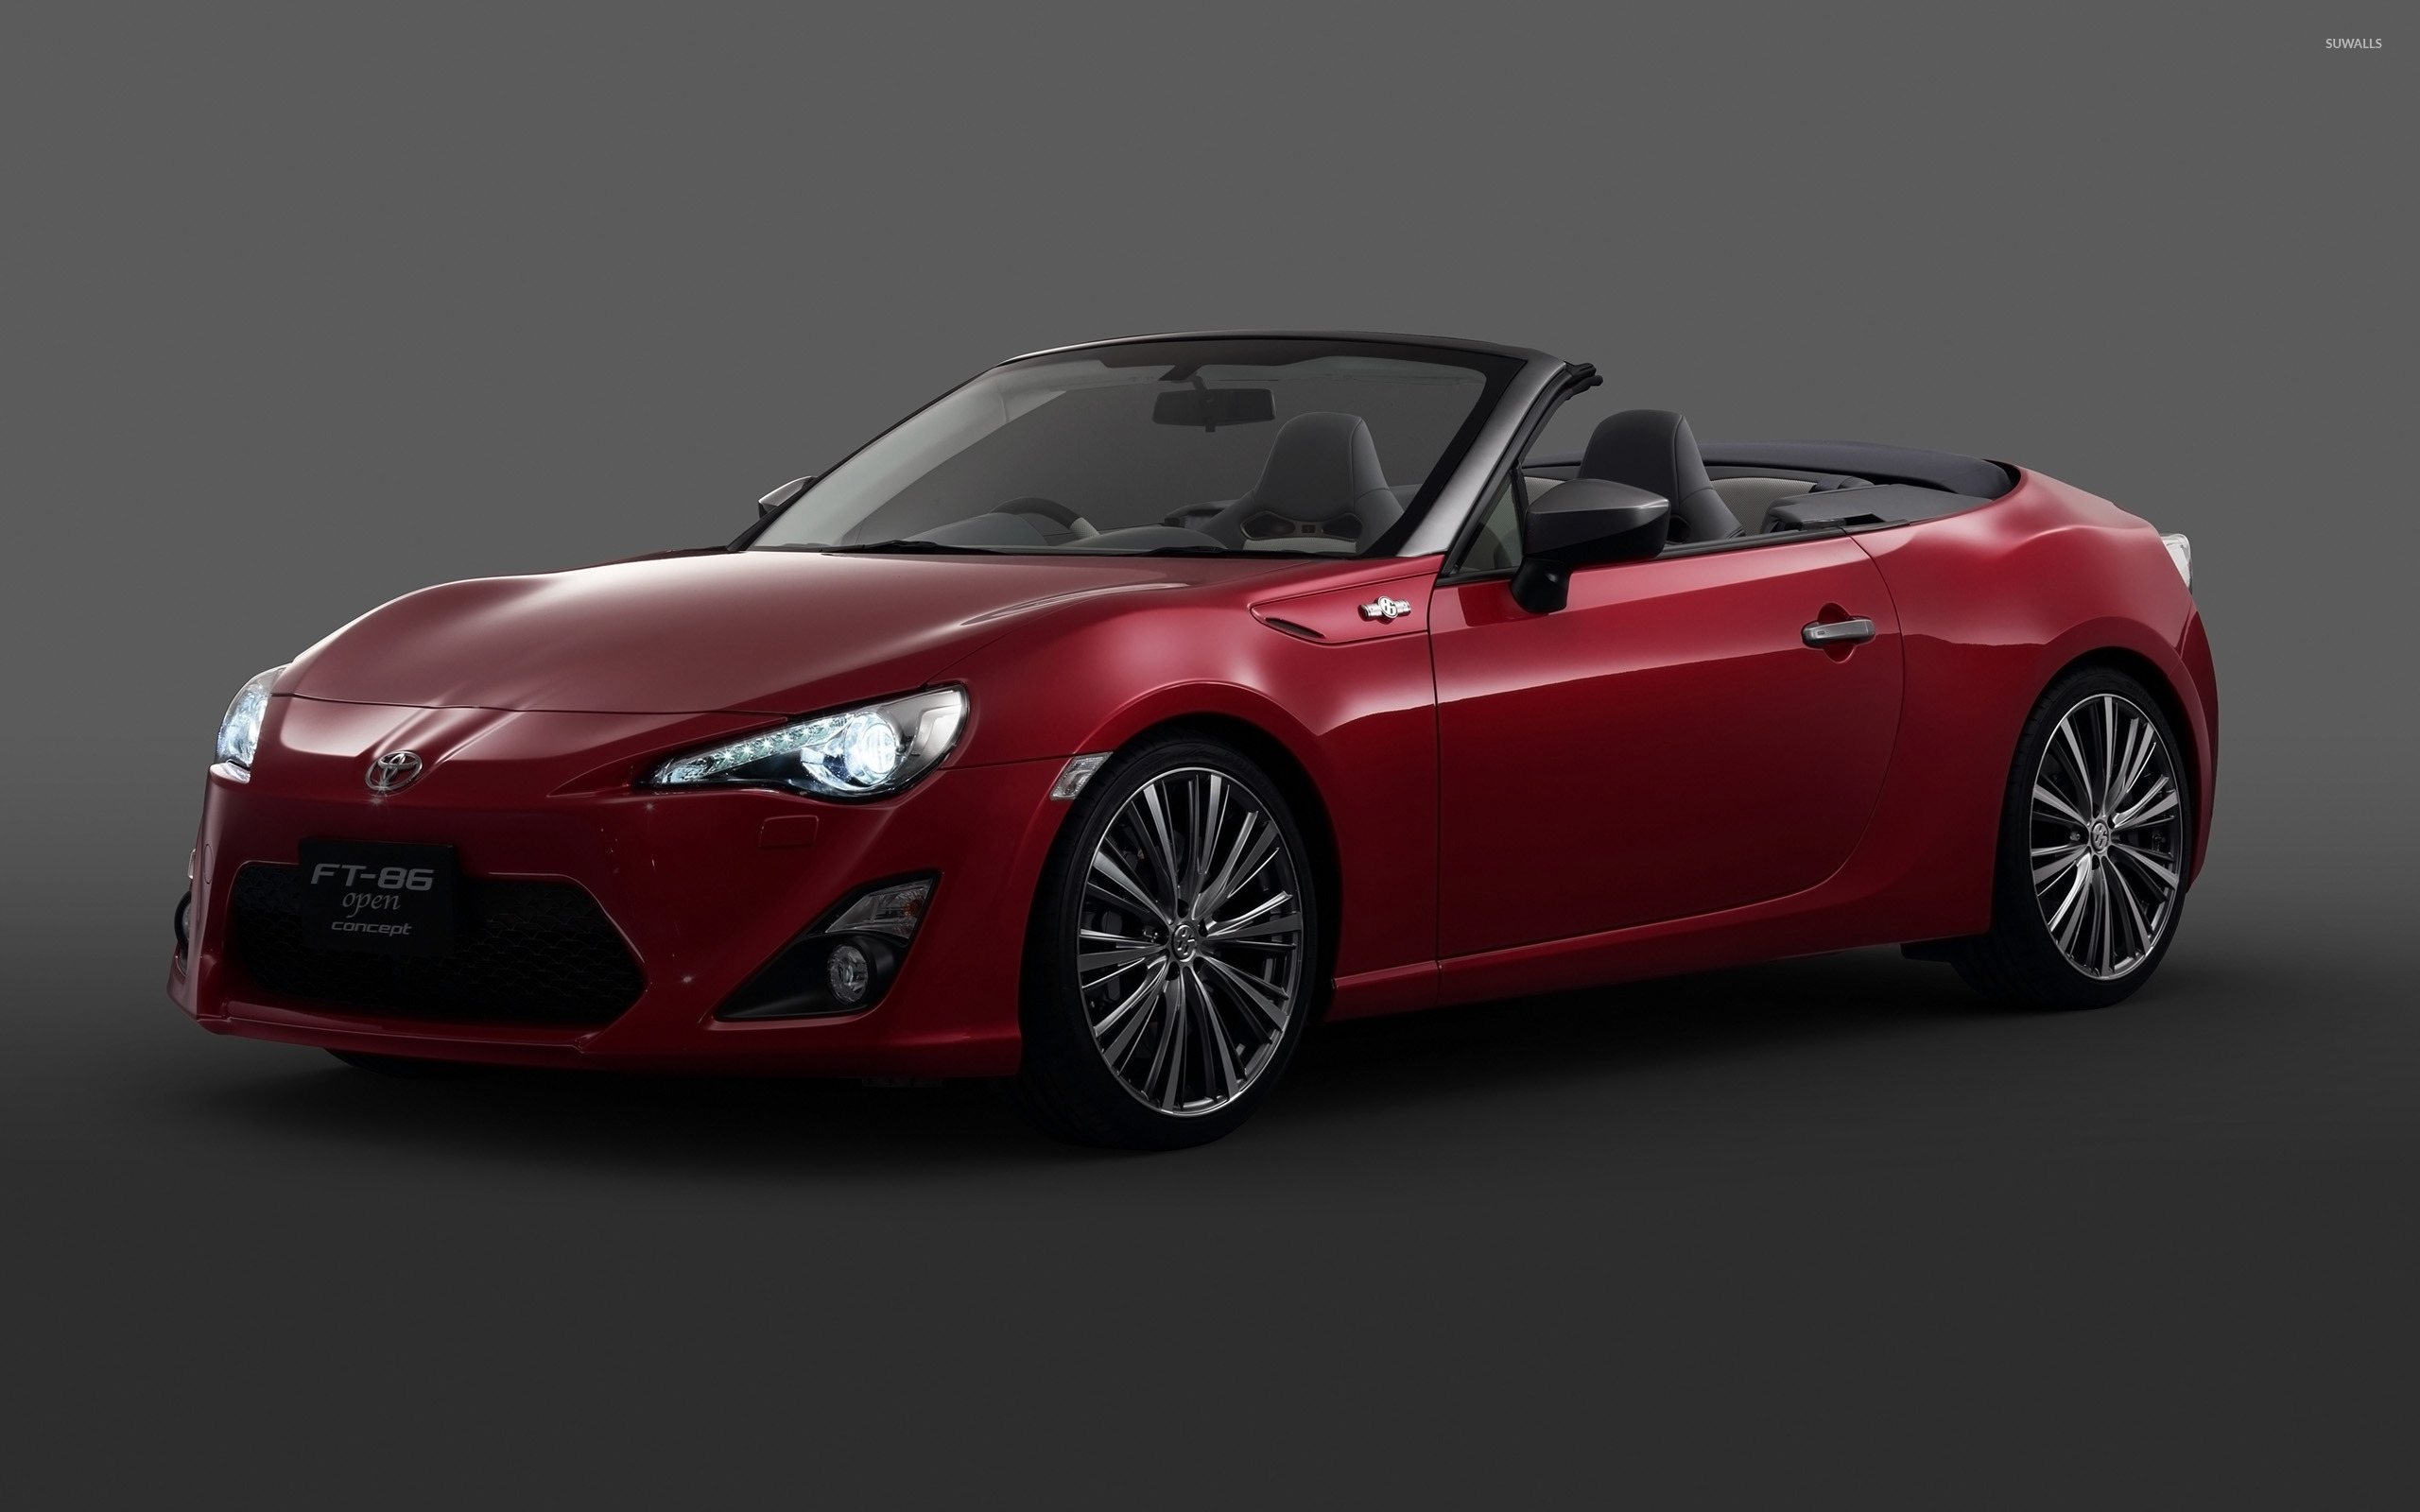 2013 Toyota FT 86 Open Concept